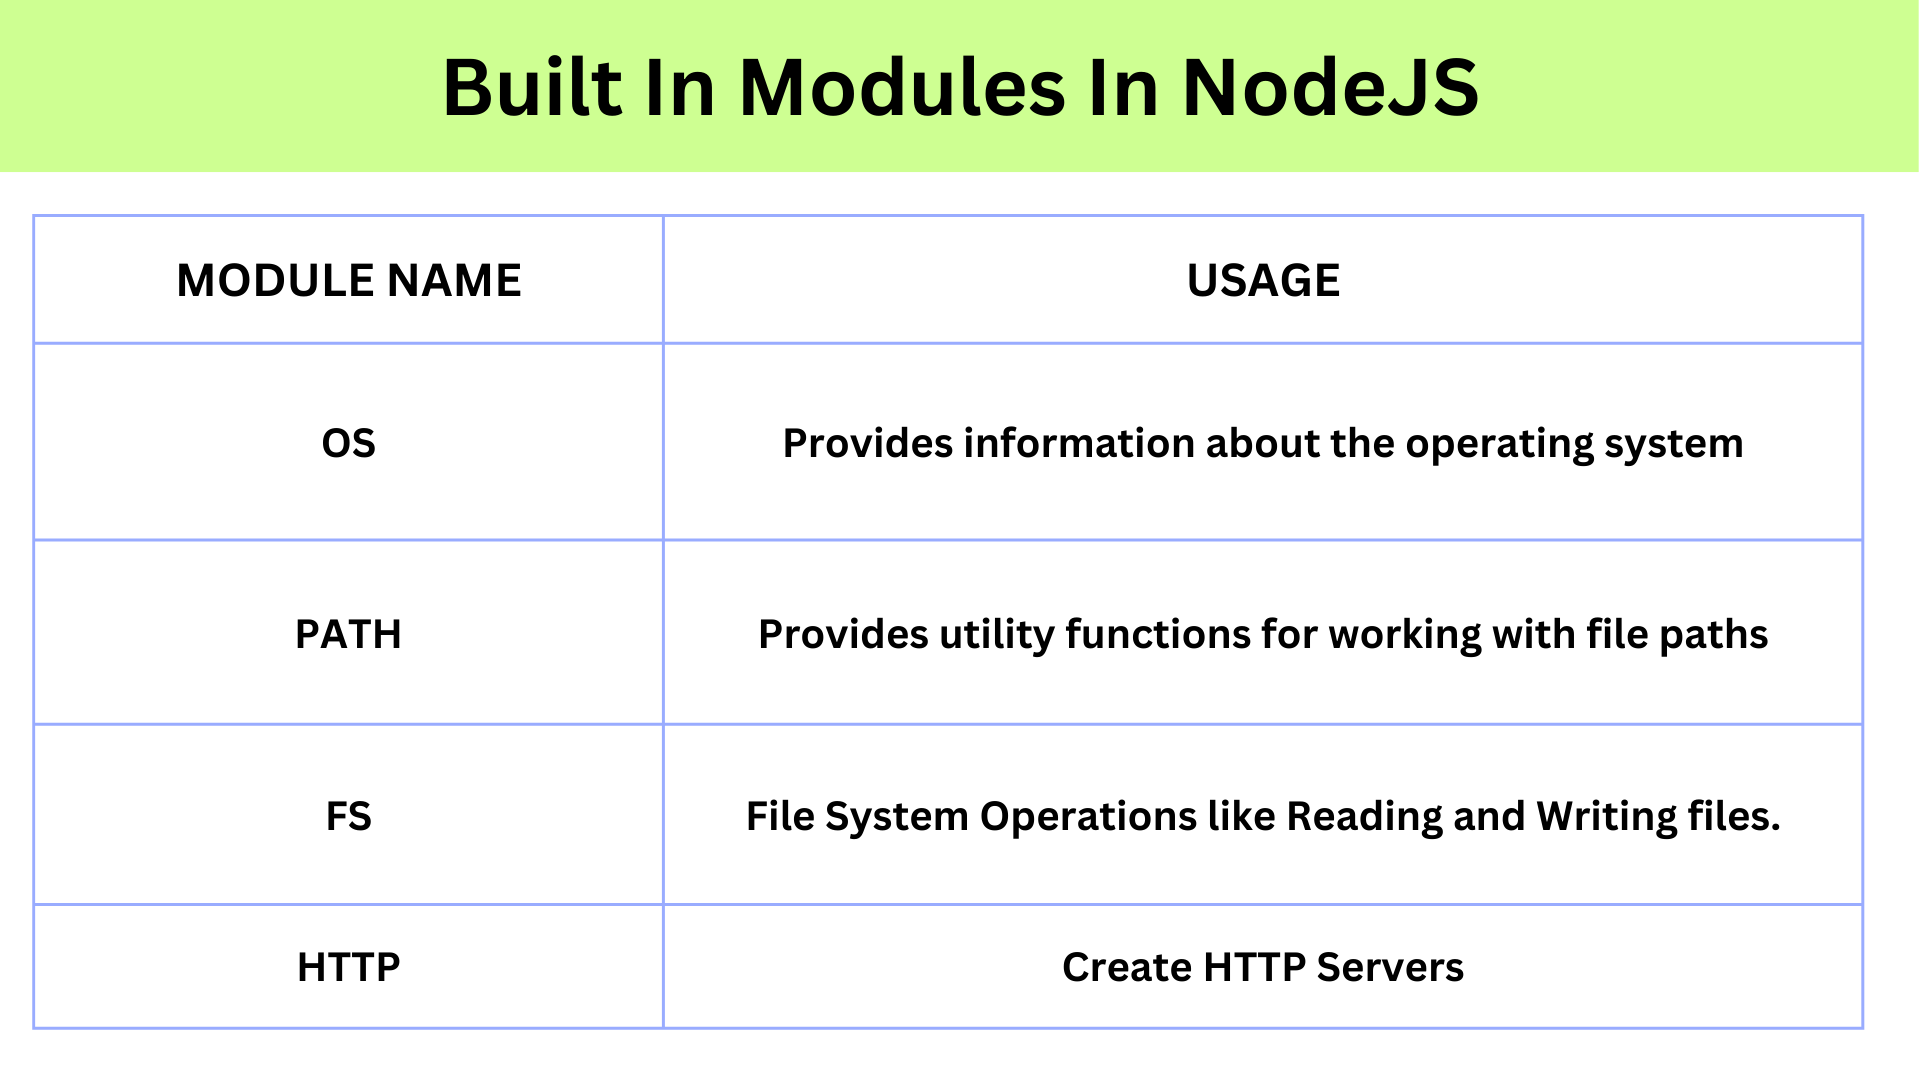 Tabular representation of the different built-in modules in NodeJS